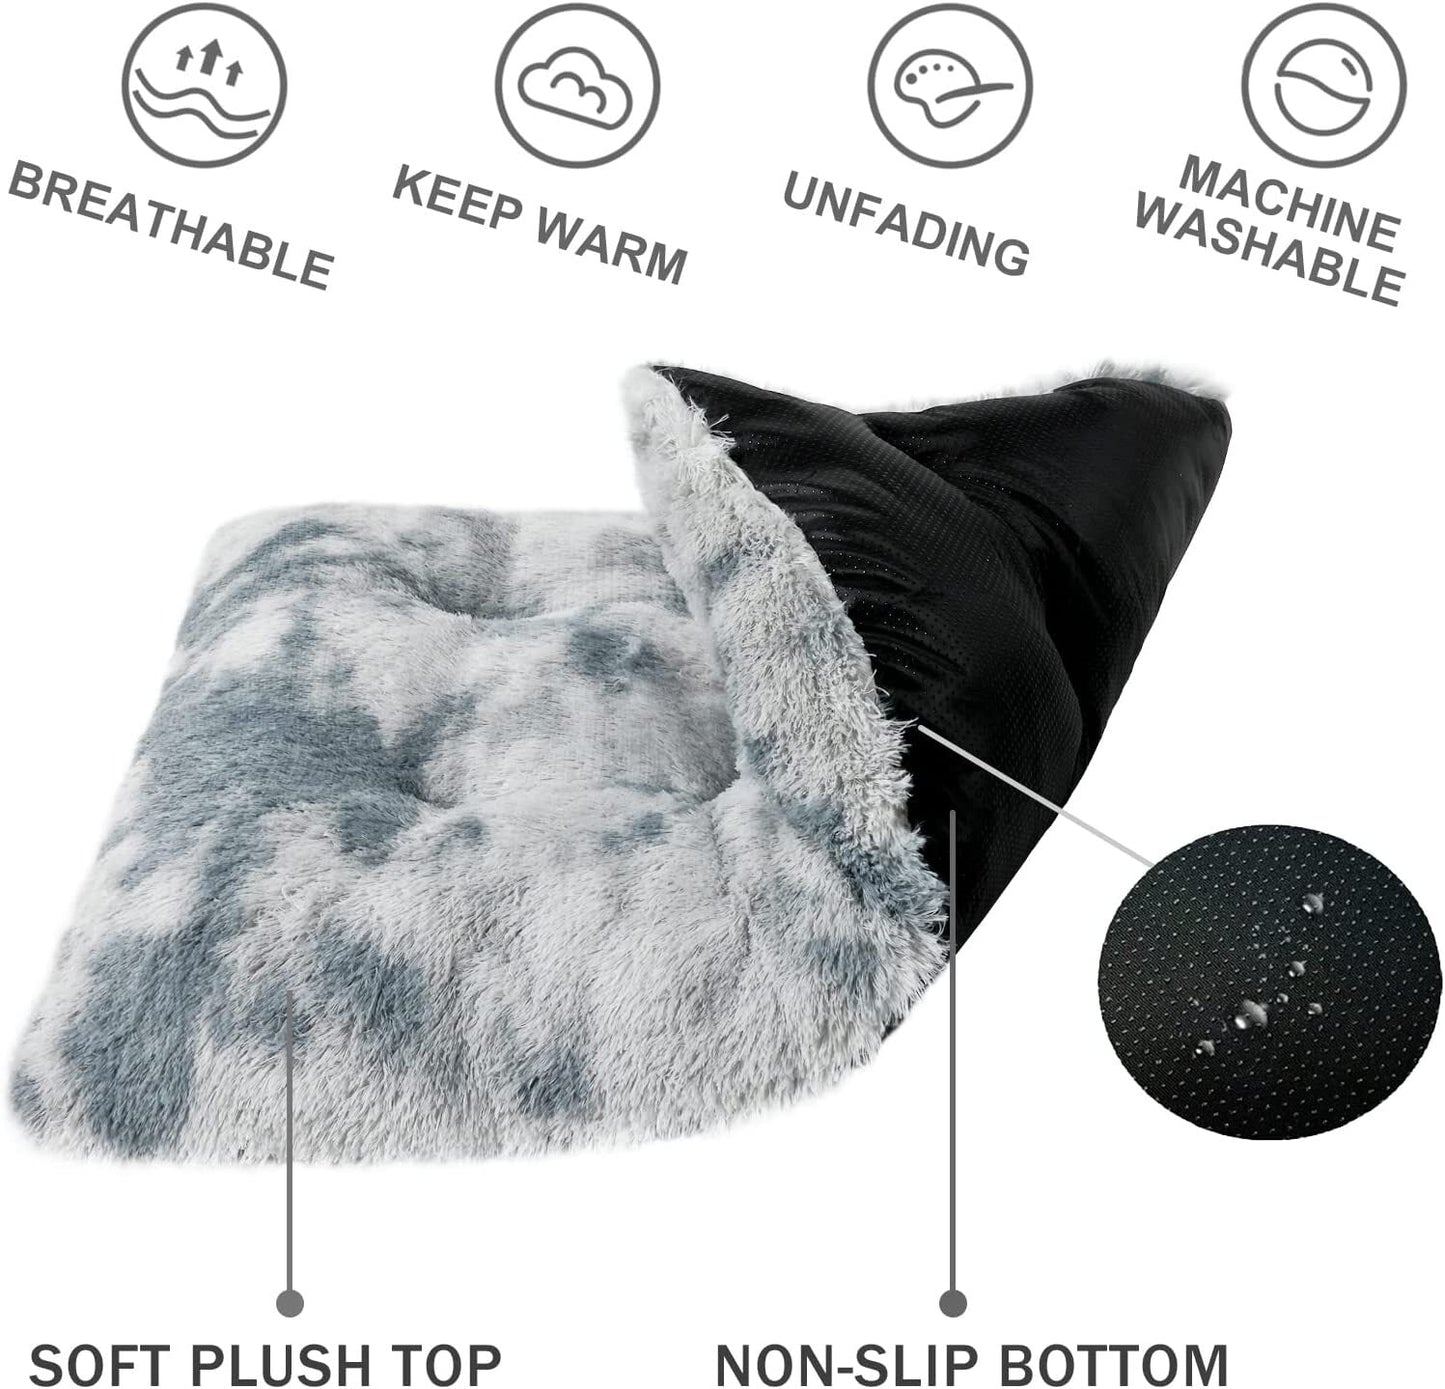 Exclusivo Mecla Soft Plush Dog Bed Crate Mat for Small Dogs (32*22*4 in), Faux Fur Fluffy Dog Pet Cat Kennel Pad with Anti-Slip Bottom, Machine Washable Gradient Grey